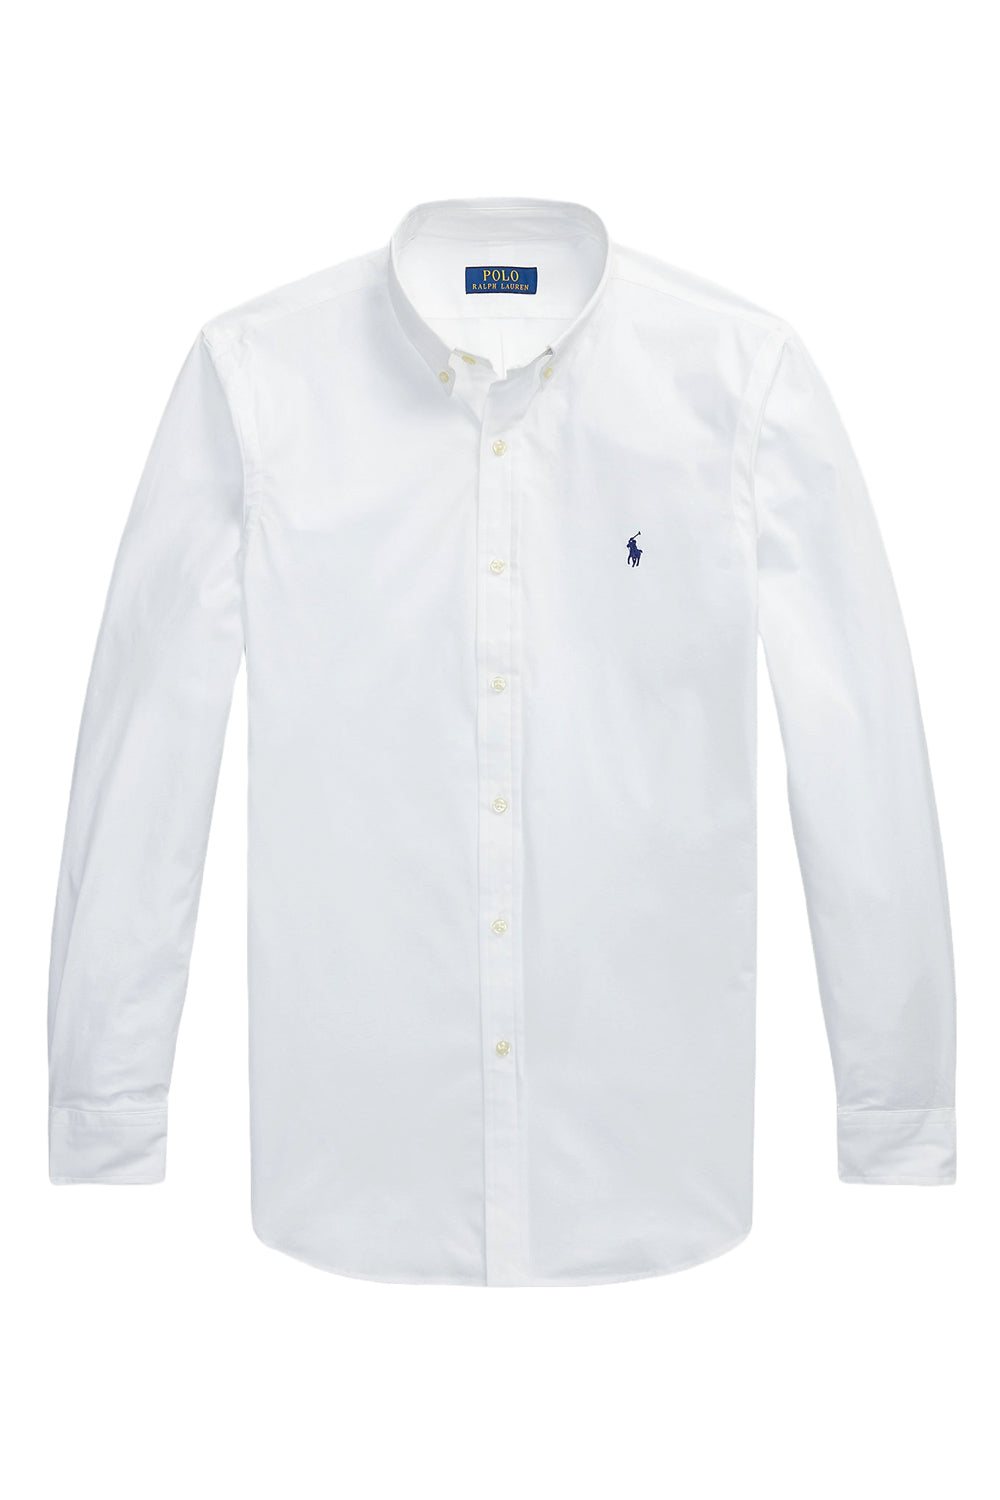 Image of POLO RALPH LAUREN Camicia in popeline stretch Slim-Fit